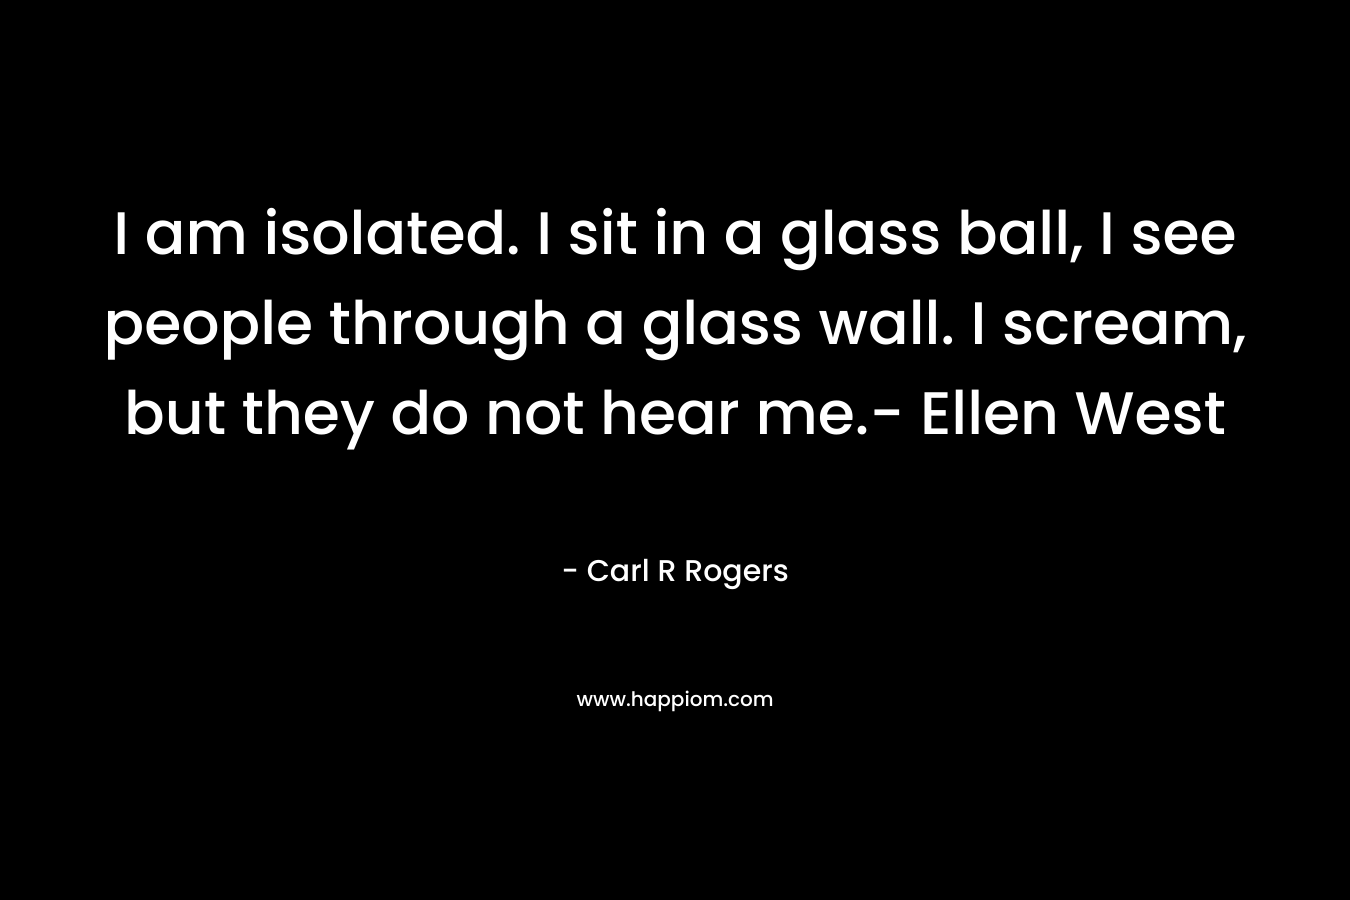 I am isolated. I sit in a glass ball, I see people through a glass wall. I scream, but they do not hear me.- Ellen West